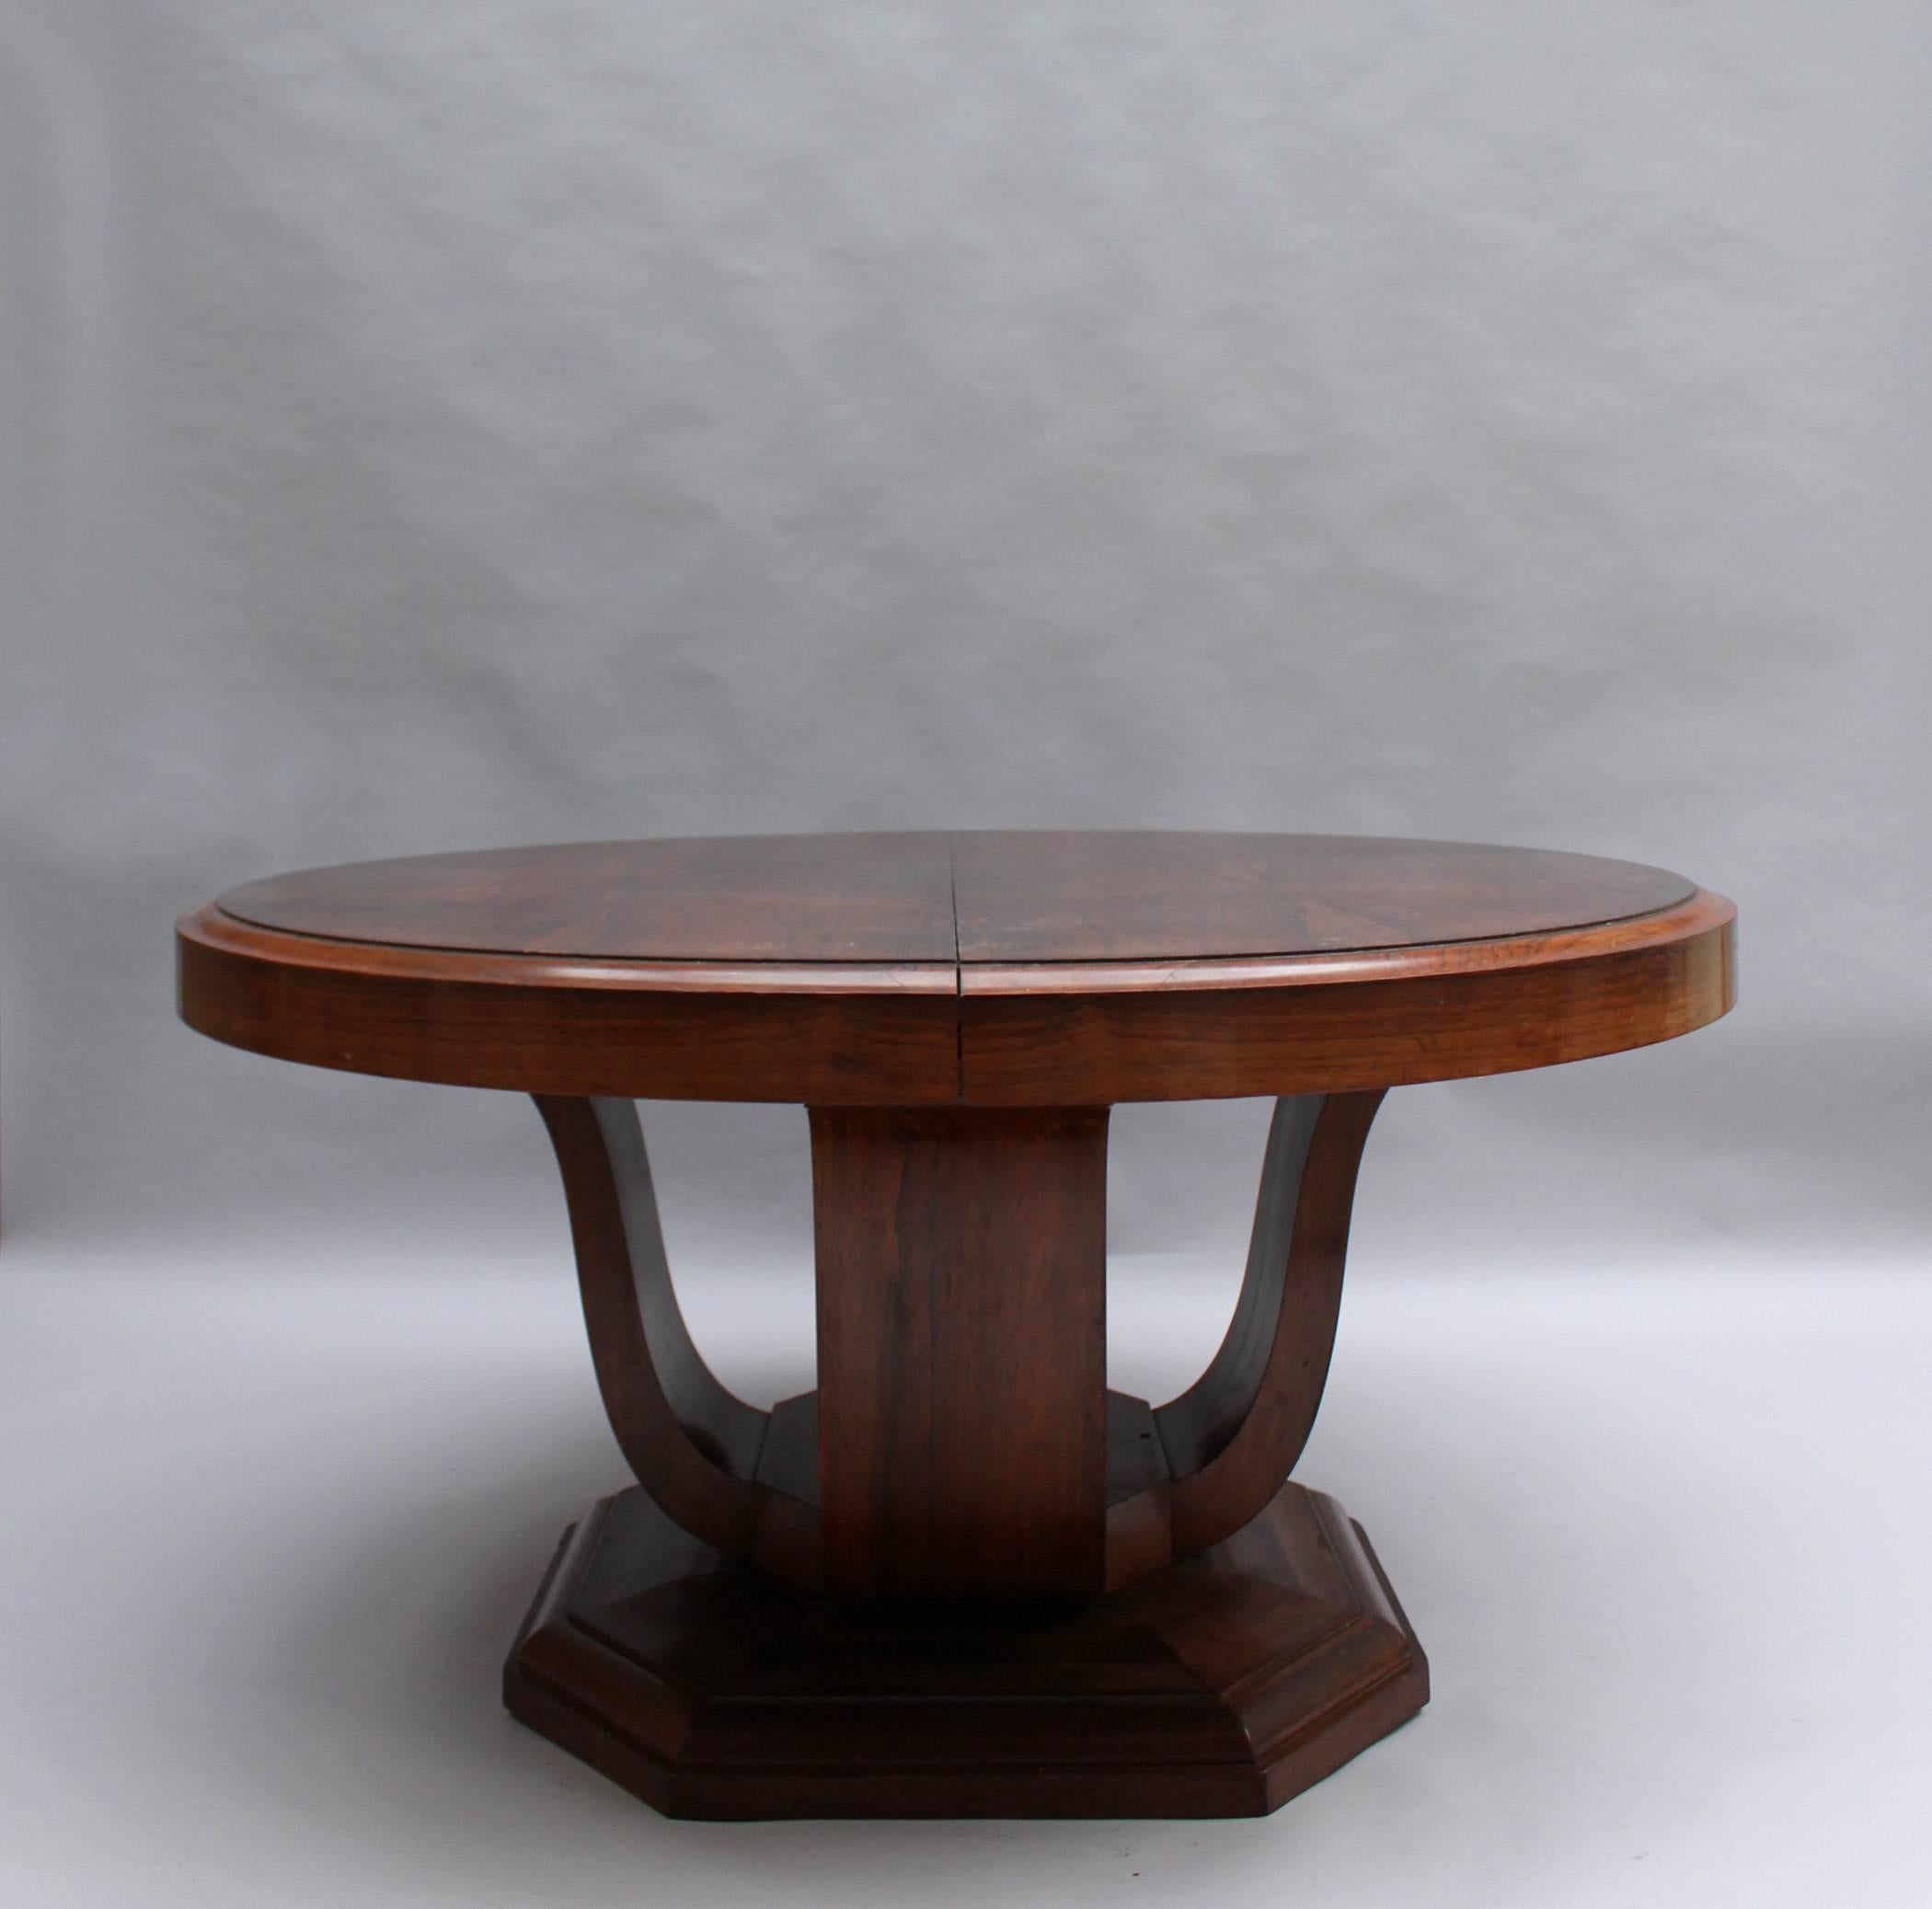 In rosewood, with a lyre-shape pedestal standing on an octagonal base, the table opens in the middle to receive six original center leaves in raw wood with no apron, for a total length of 168 inches / 14 feet.